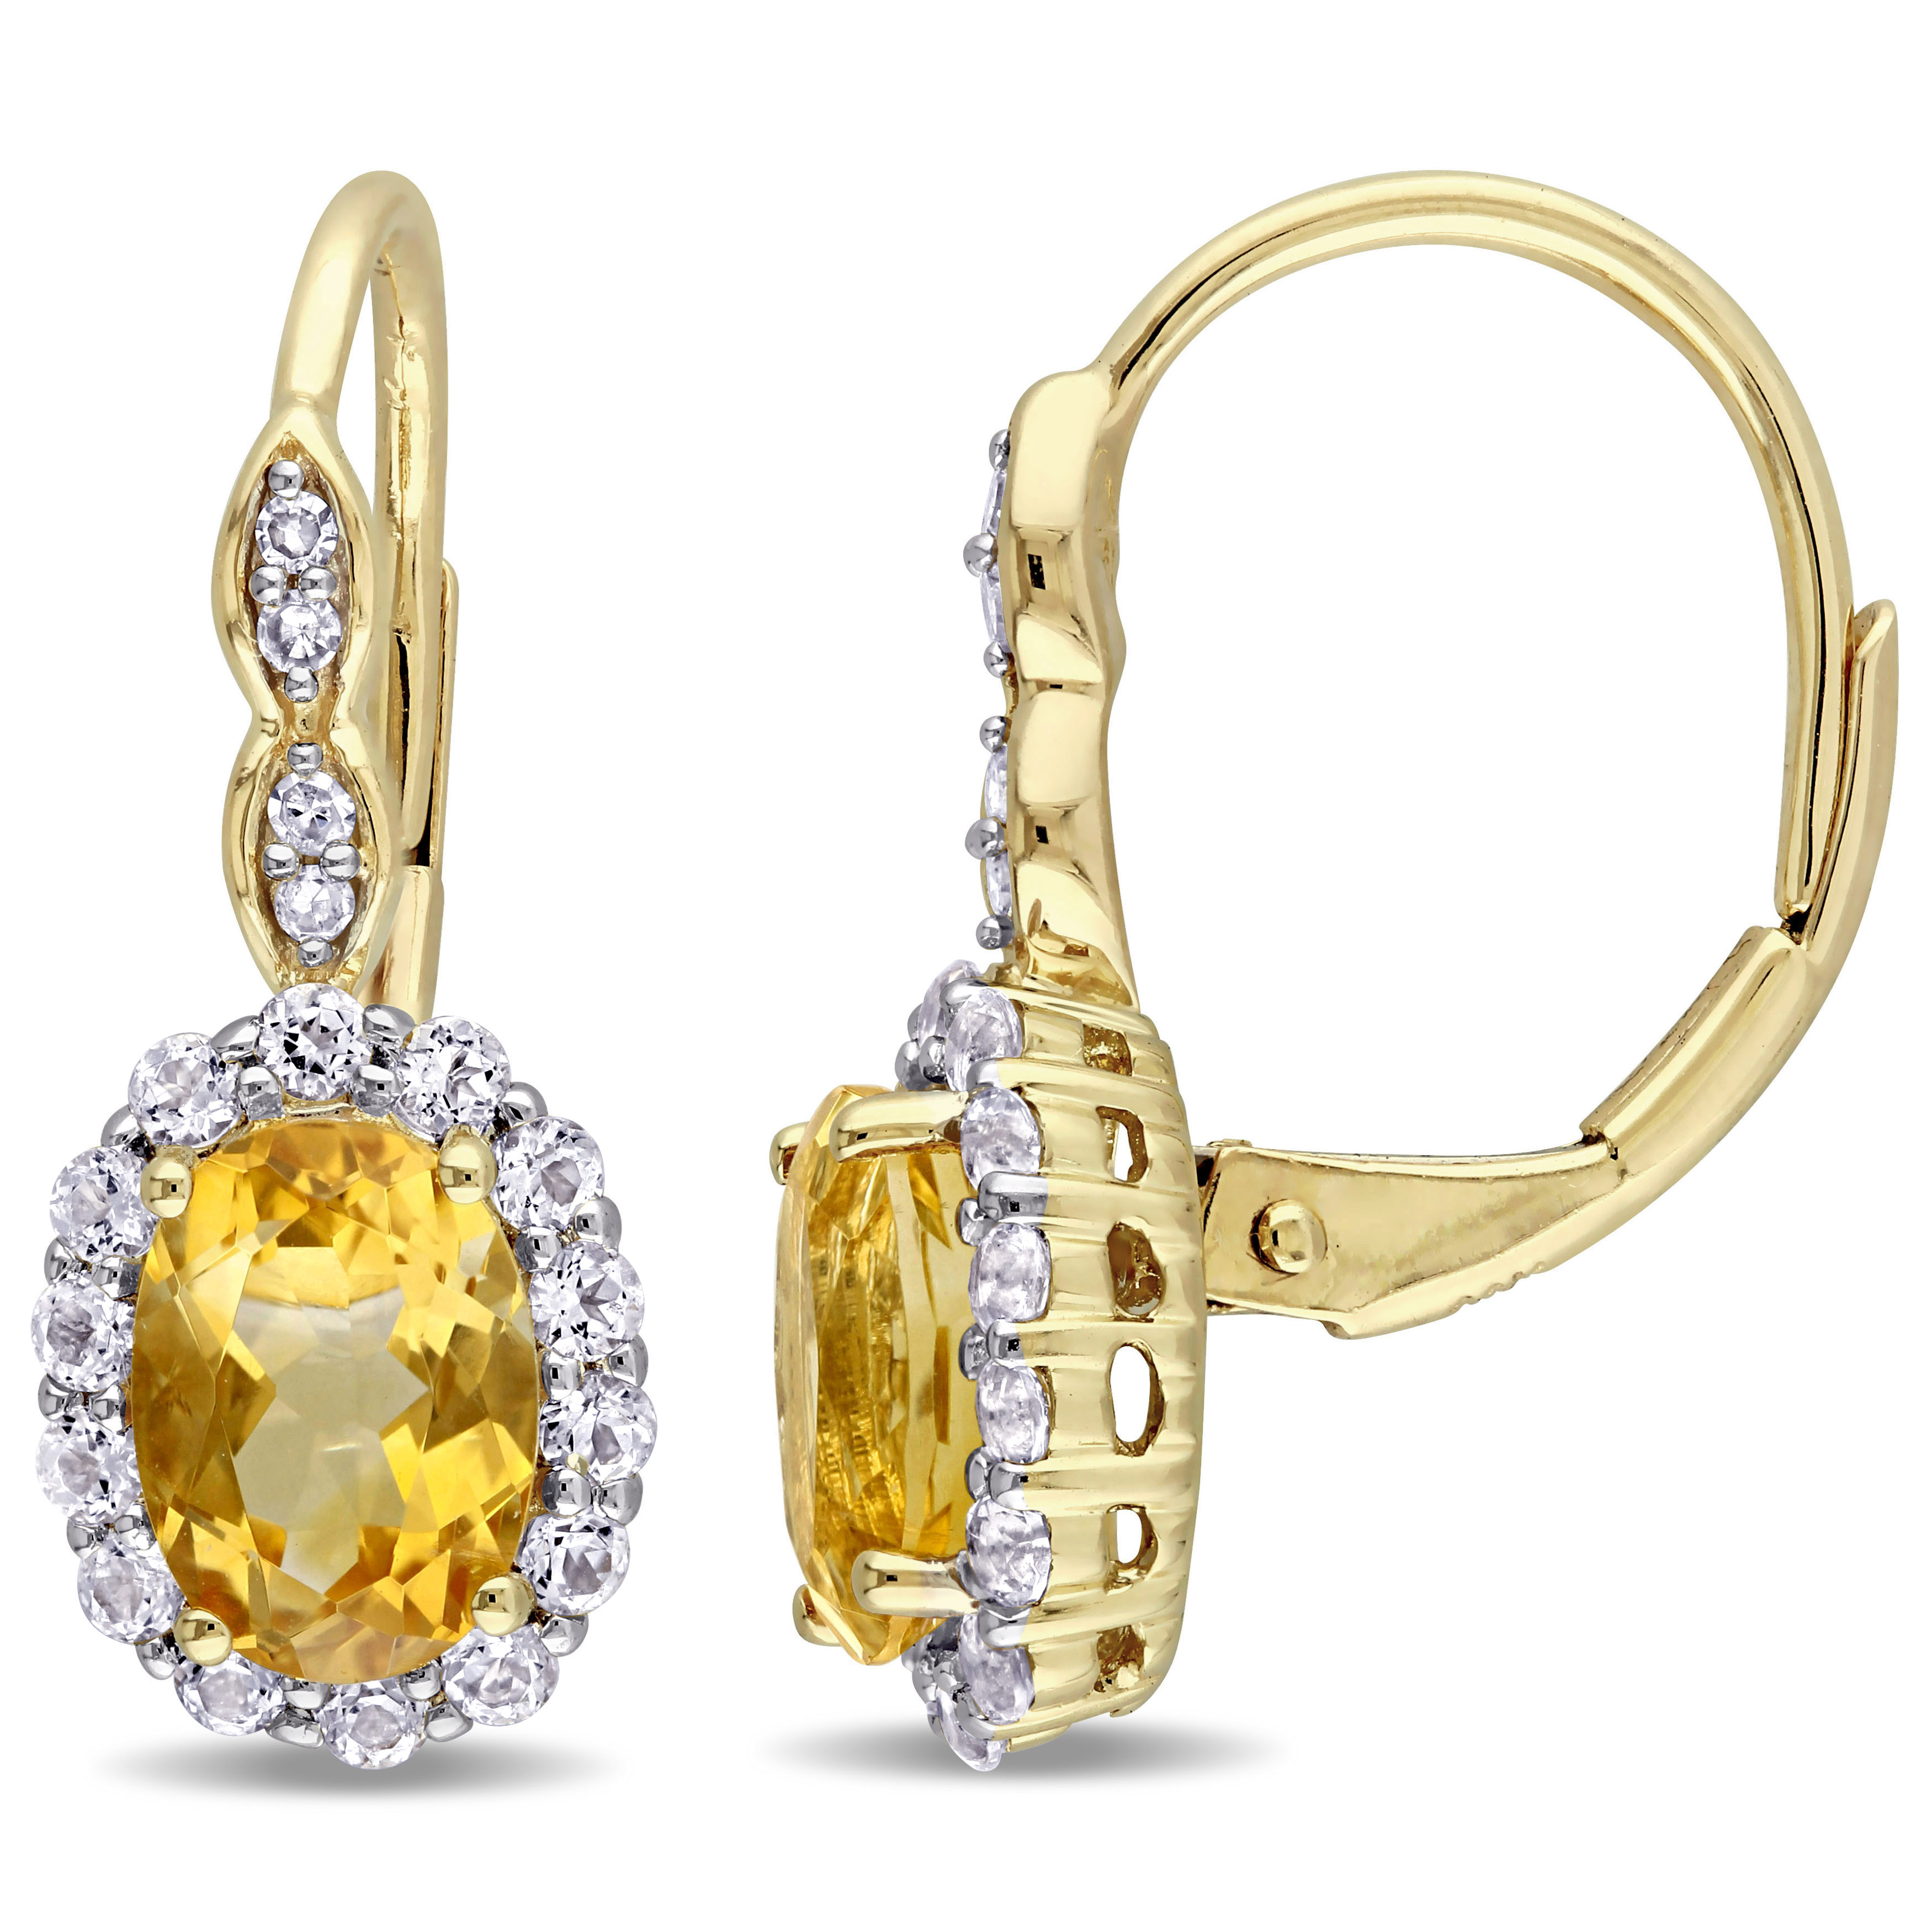 2 1/4 CT TGW Oval Shape Citrine, White Topaz and Diamond Accent Vintage LeverBack Earrings in 14k Yellow Gold